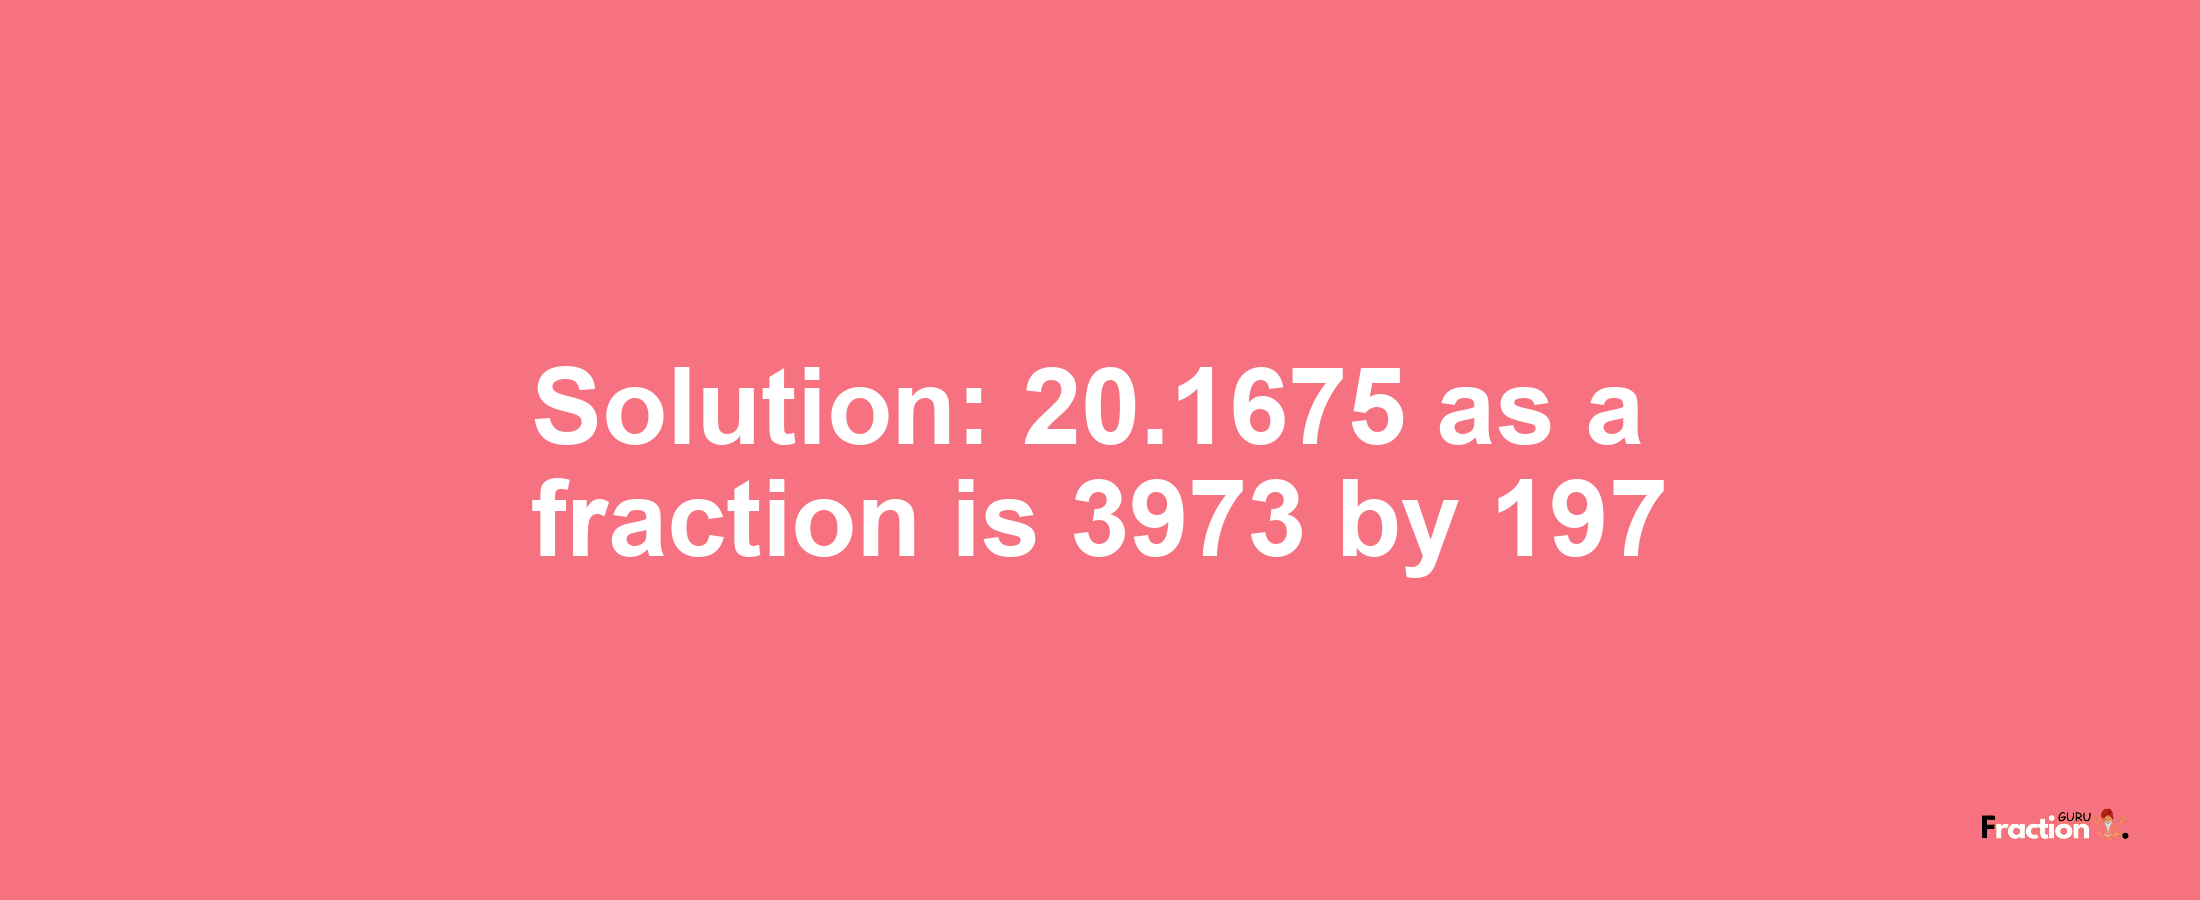 Solution:20.1675 as a fraction is 3973/197